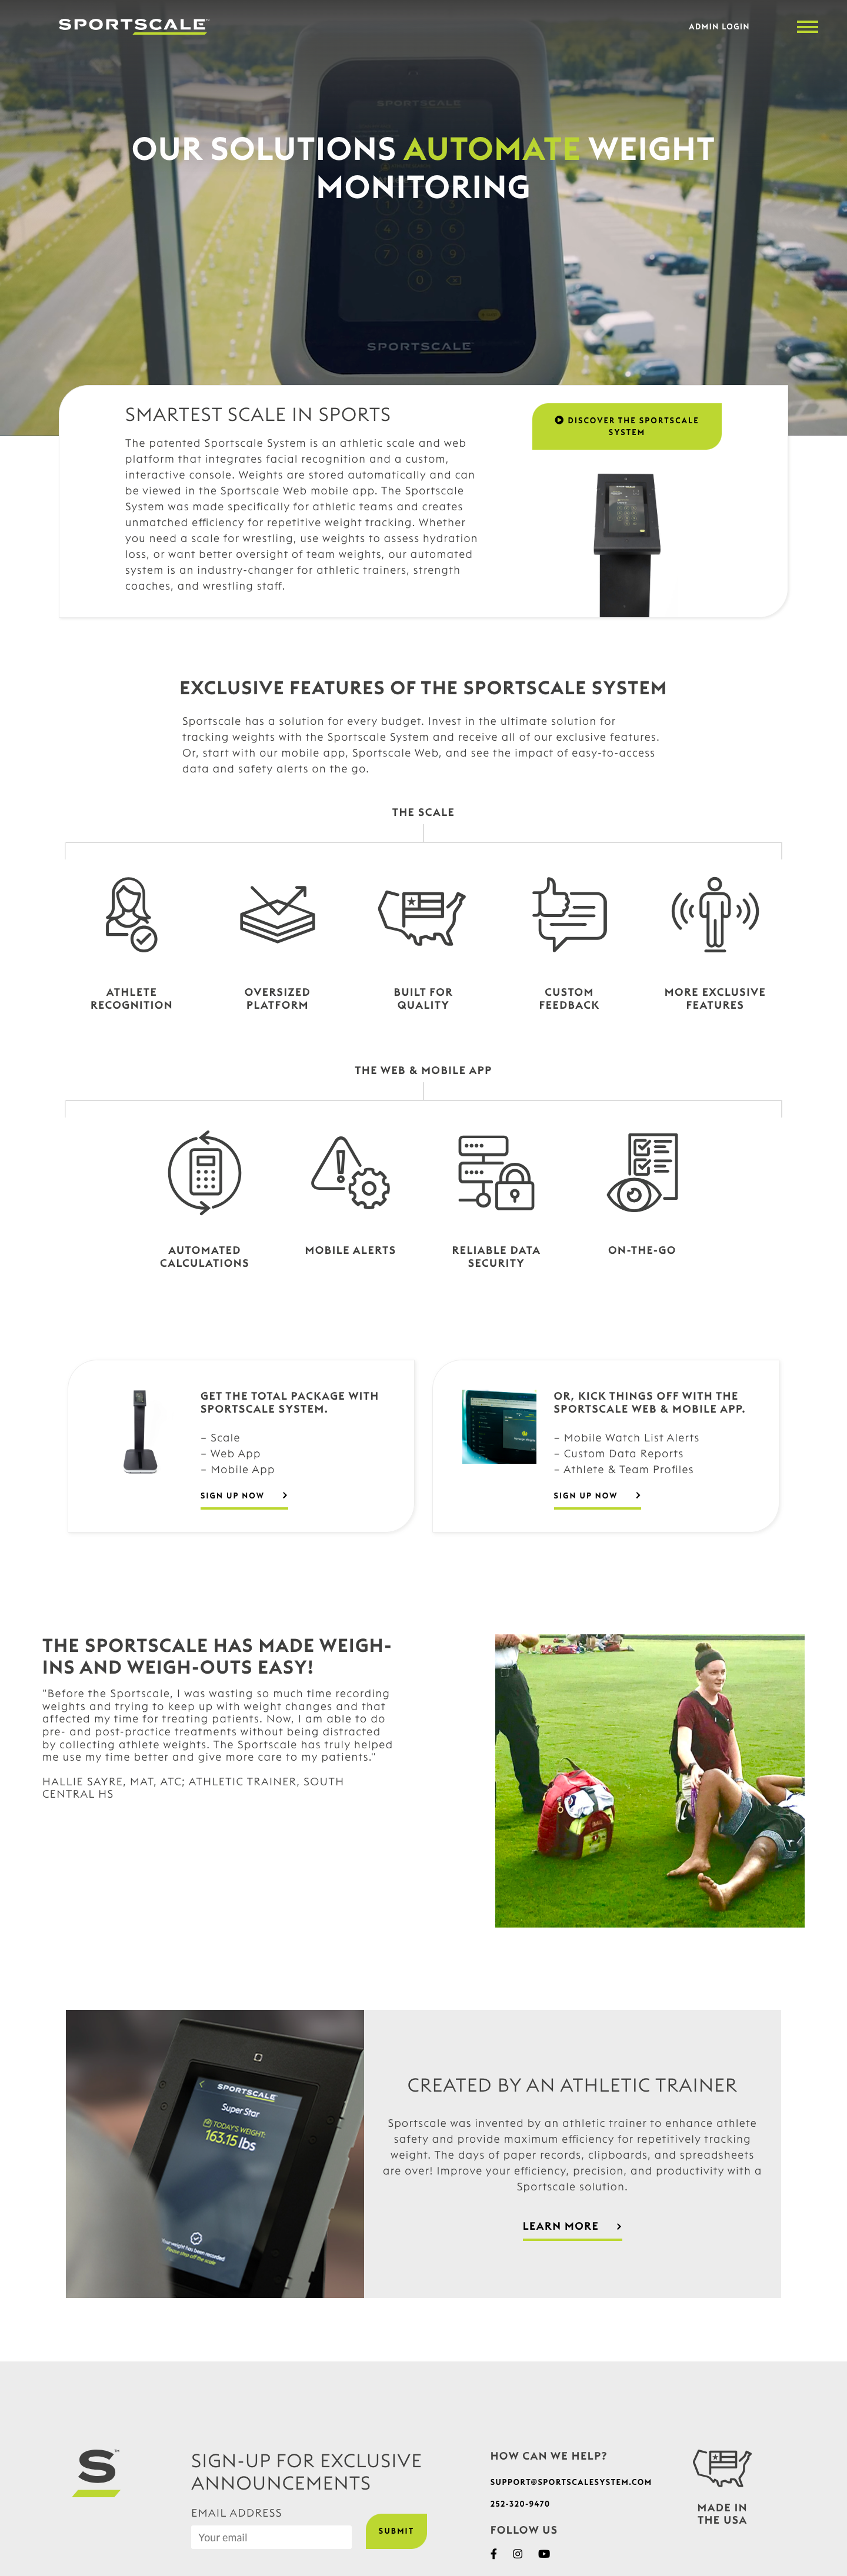 Website Design and Development for Sportscale Systems